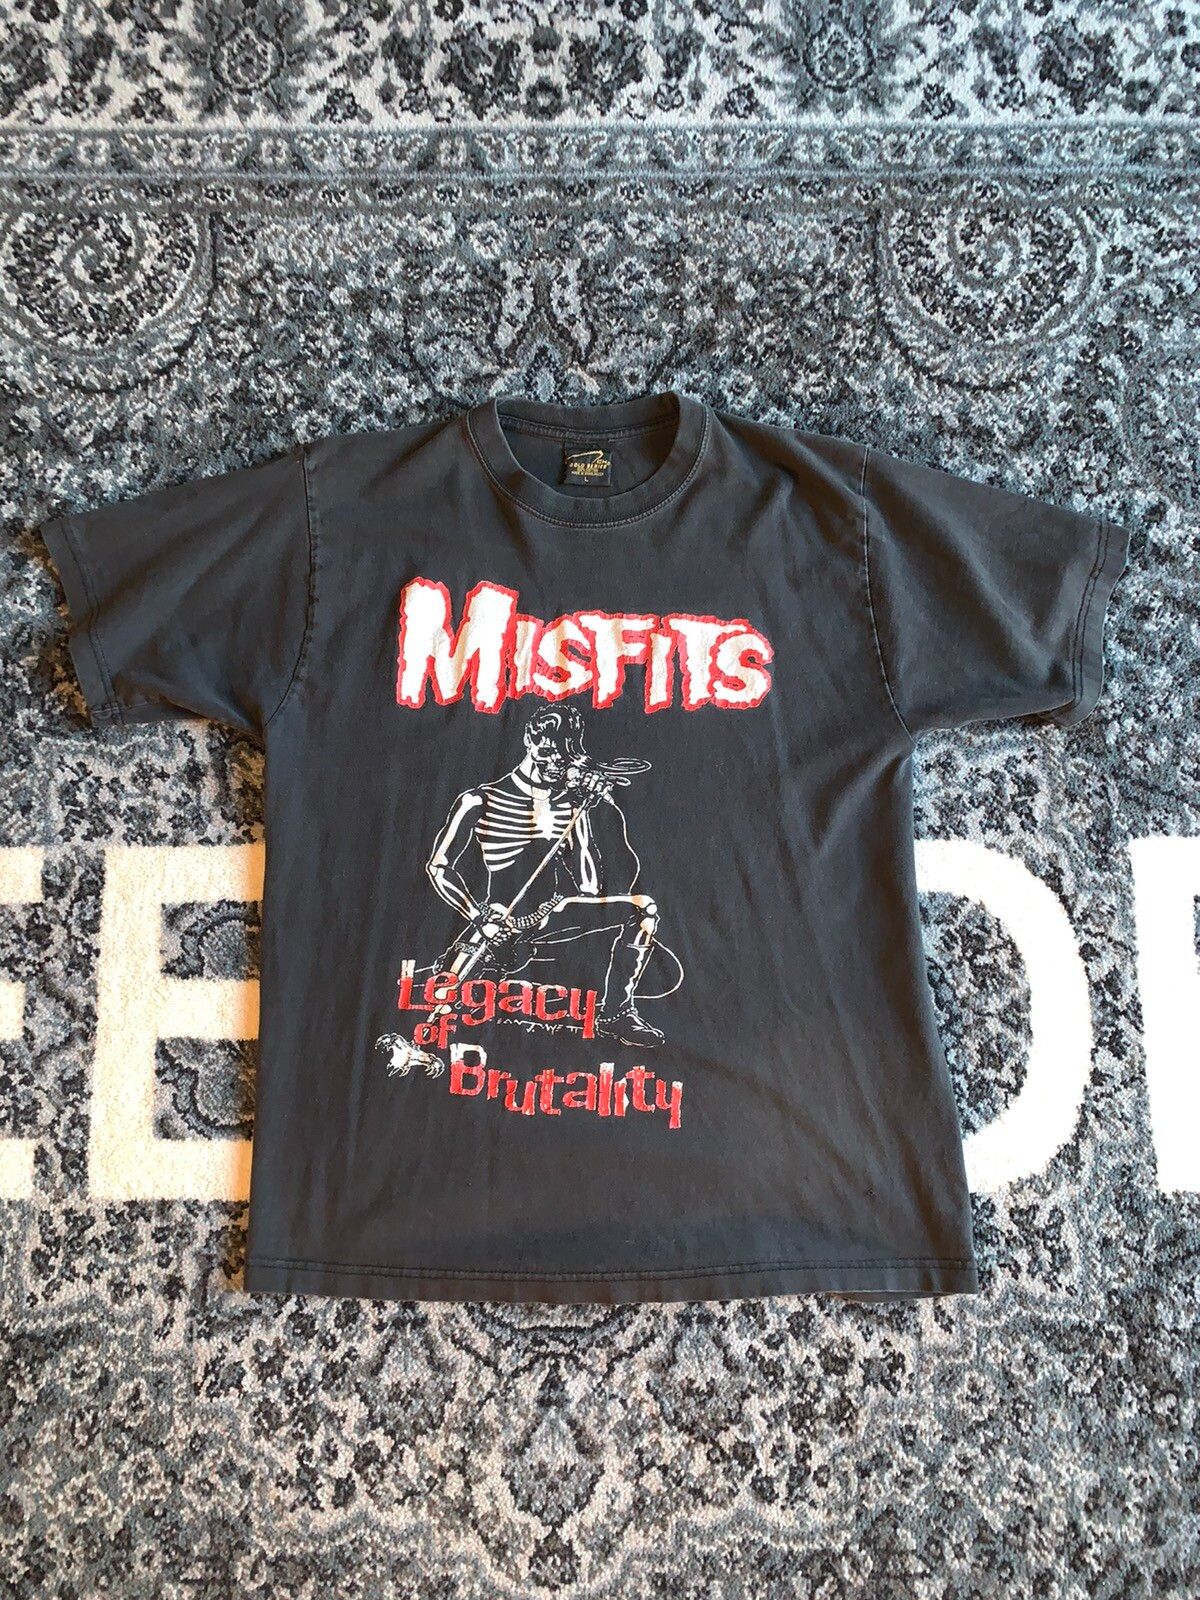 Misfits Misfits Legacy of Brutality tee Size US M / EU 48-50 / 2 - 1 Preview